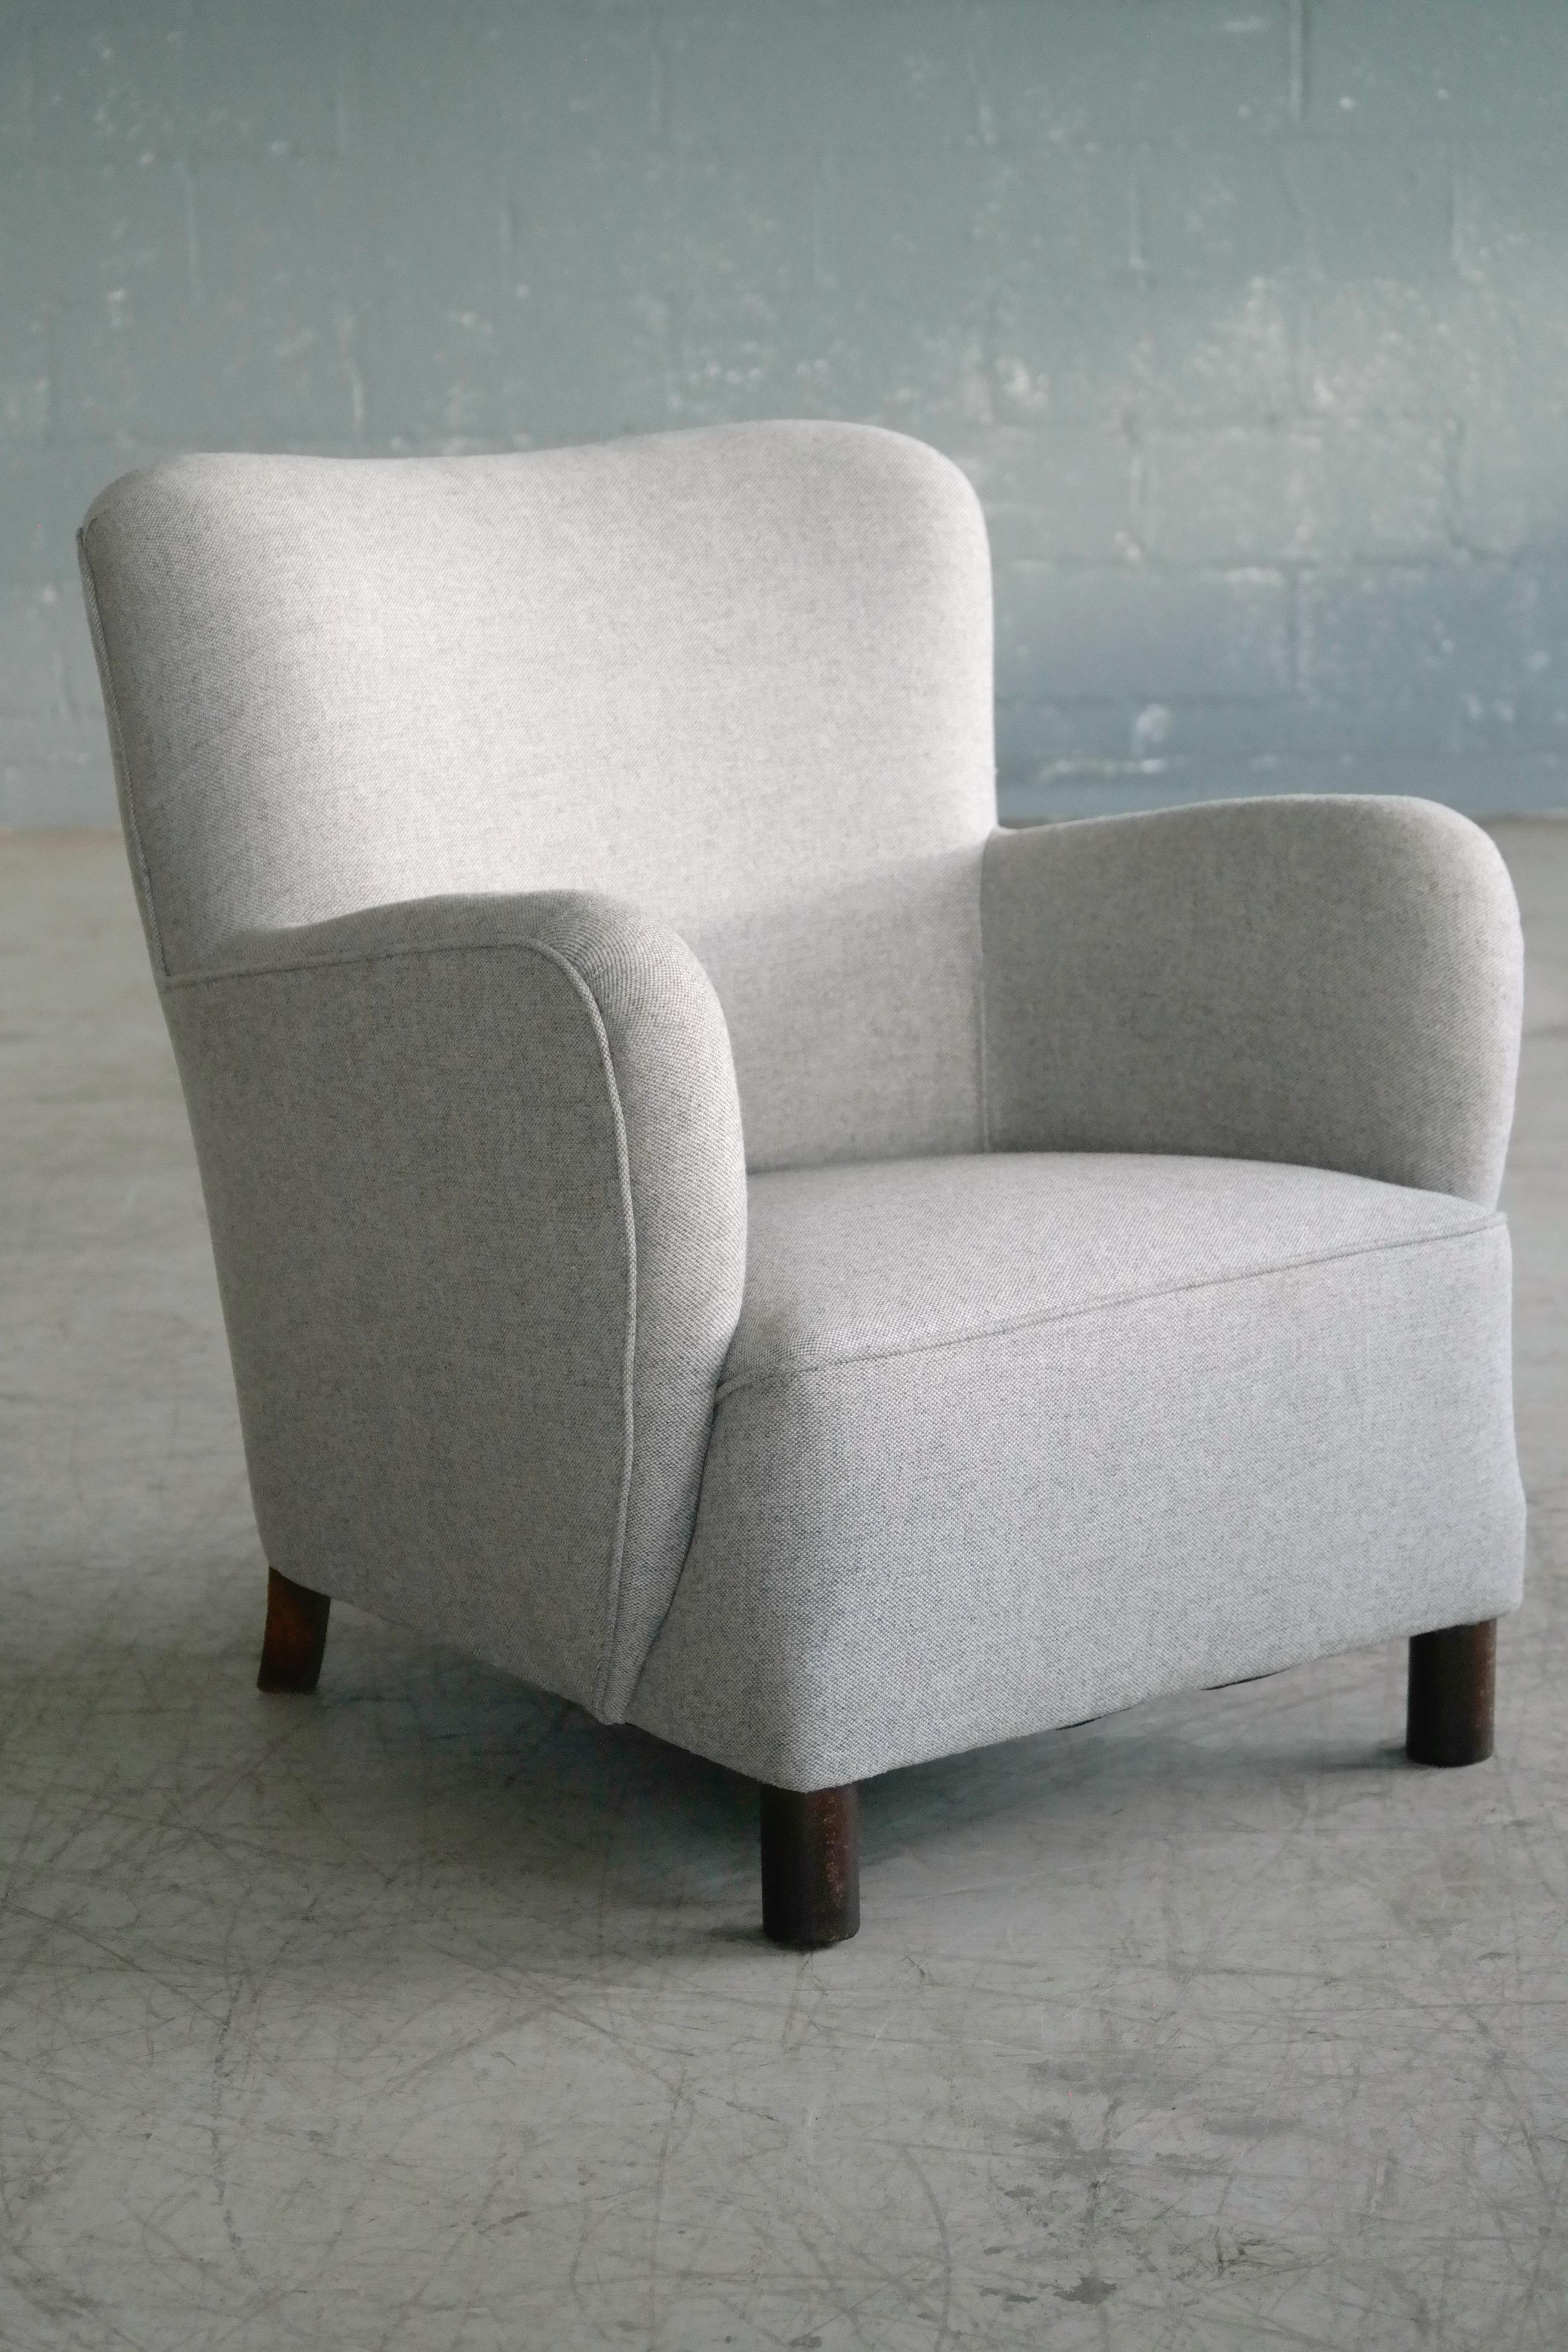 Rare to find Mogens Lassen attributed low back lounge chair from the 1940s featuring the rounded armrest design and the cylindrical front legs that are very characteristic of Lassen. Lassen's unique style is increasingly coveted and copied and for